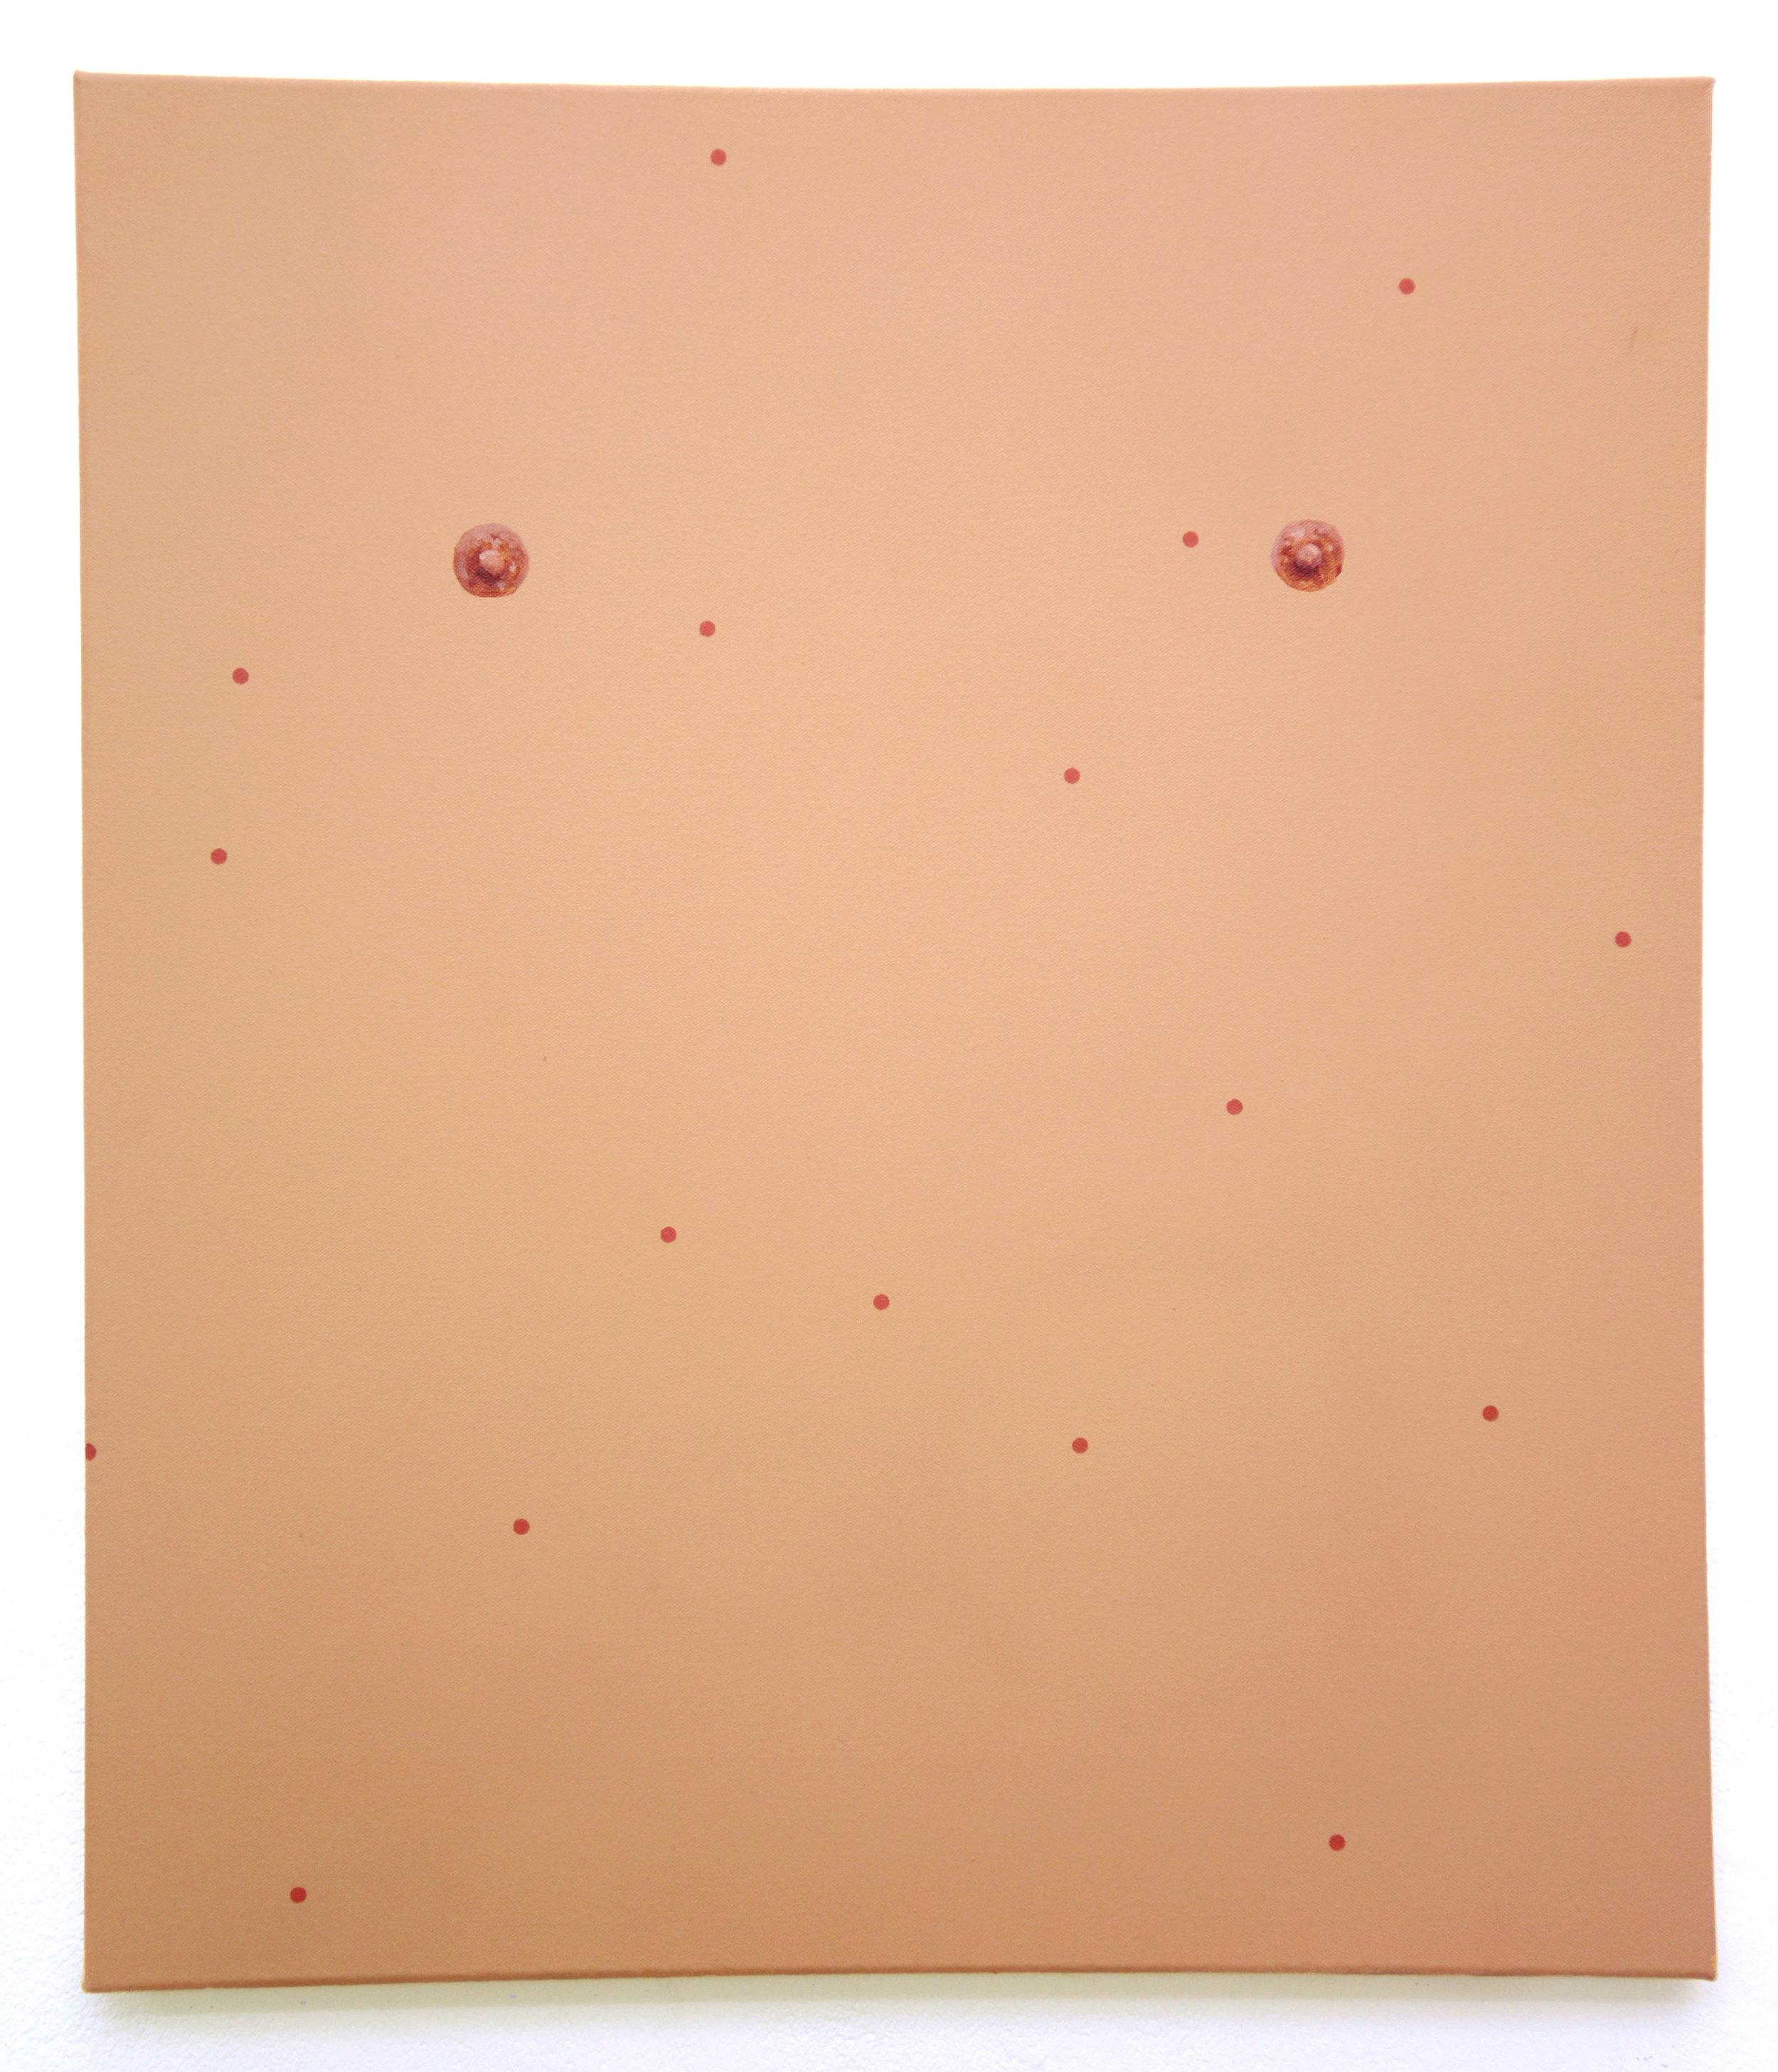 Chicken pox, acrylic and oil on canvas, 59cm x 70cm, 2016